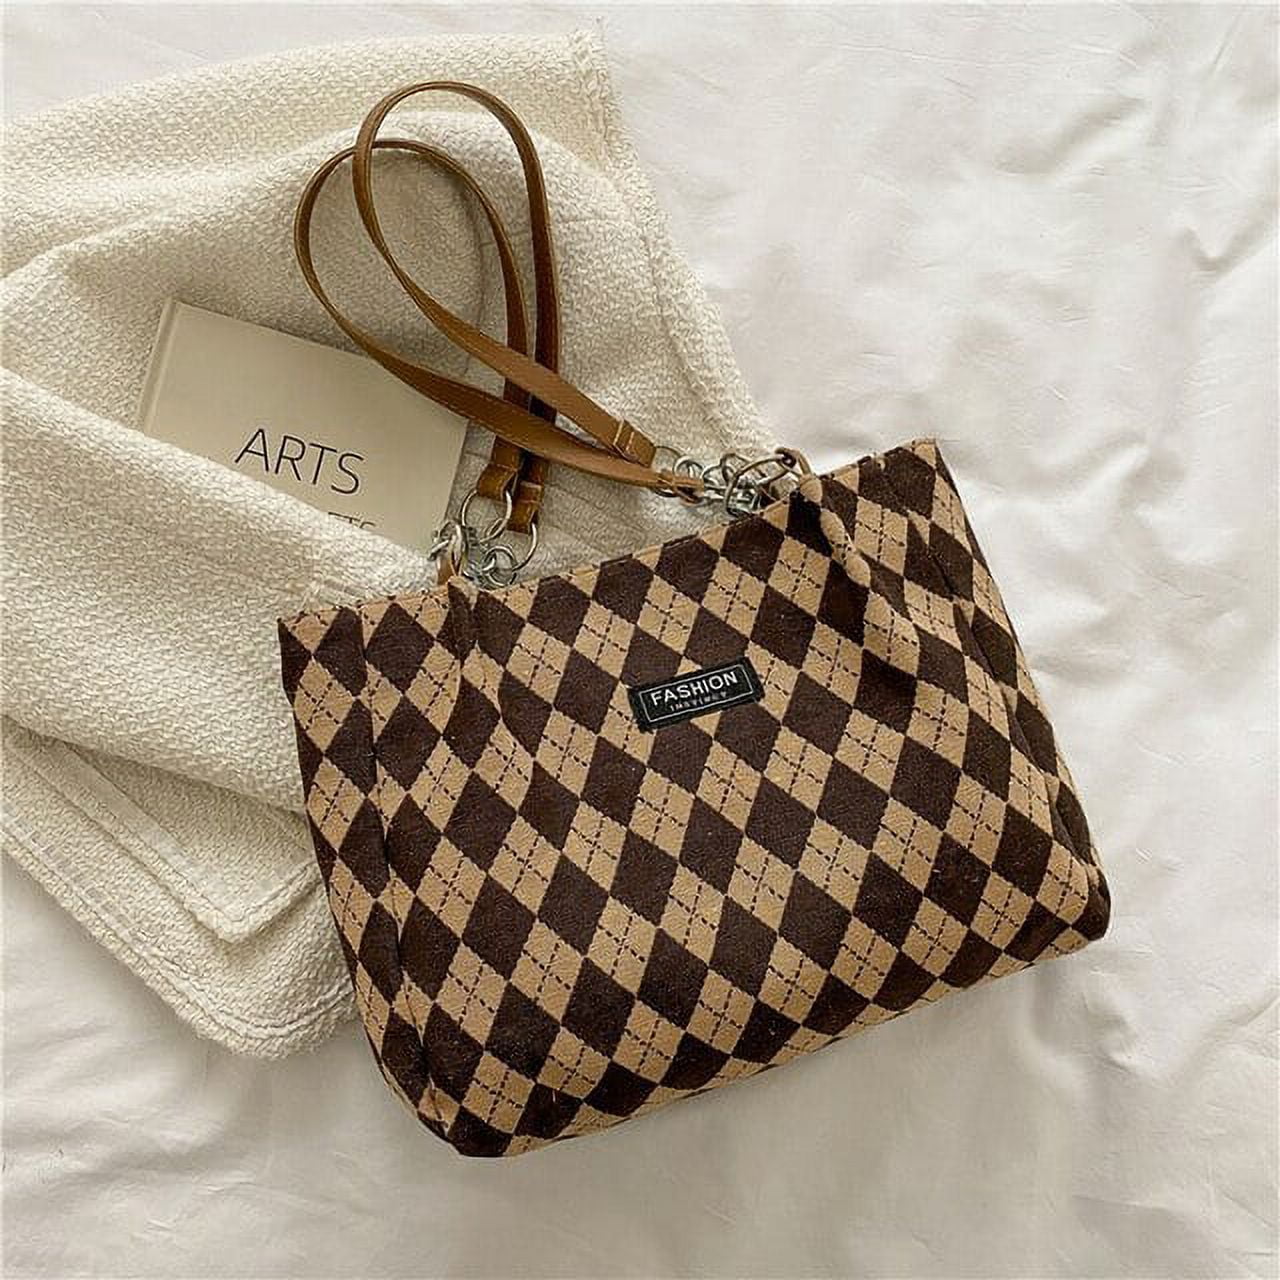 Fashionable Argyle Shaped Hobo Bag For Women With Chain Decoration